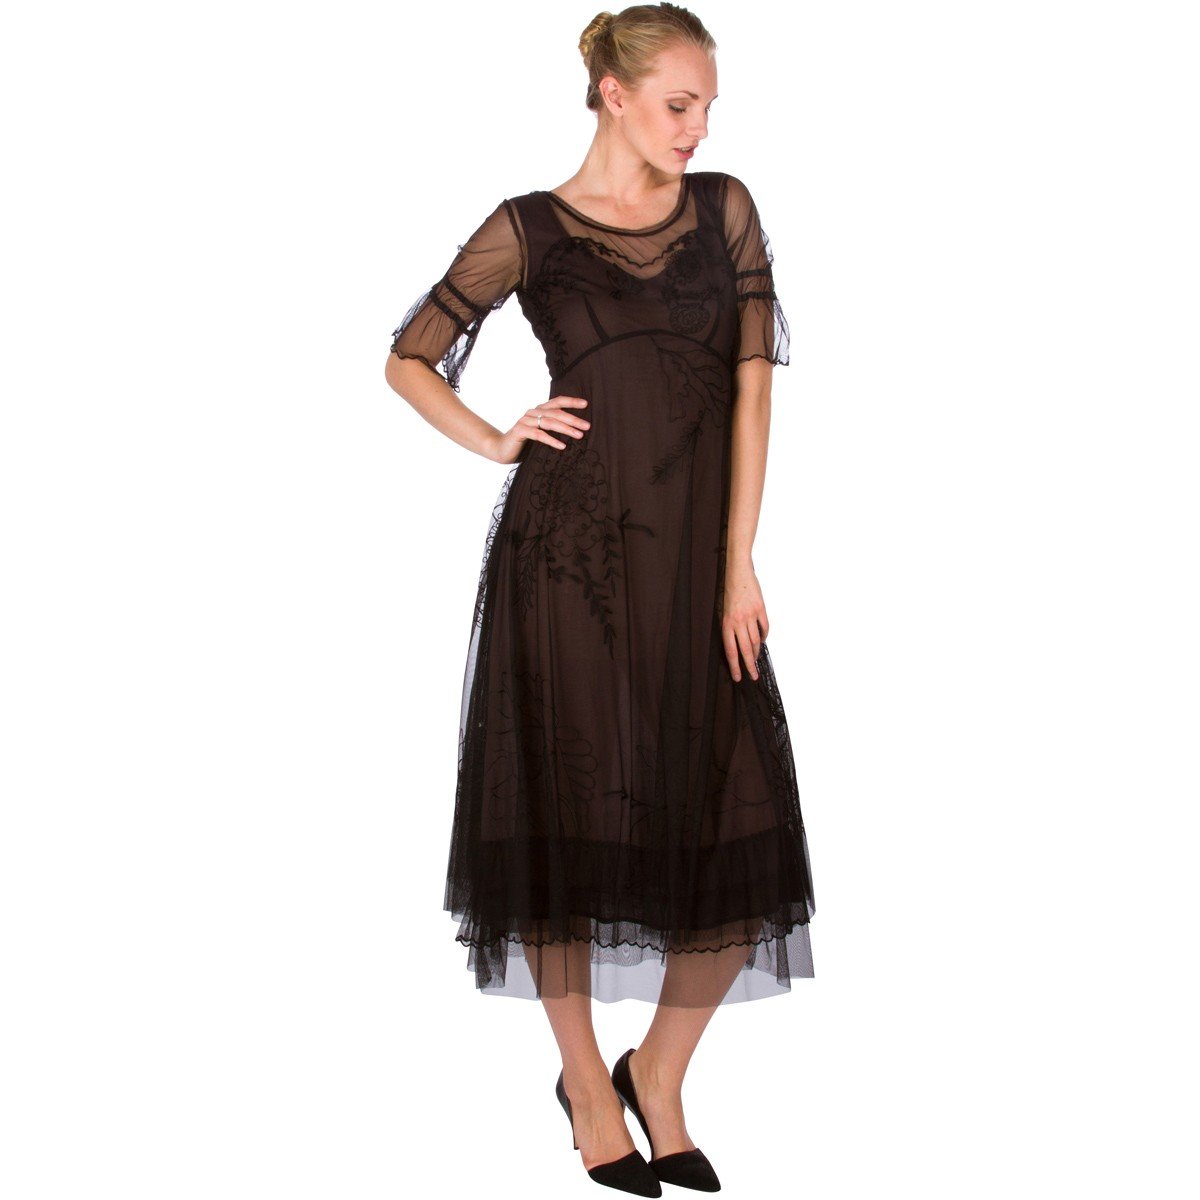 "Autumn Caprice" Vintage Inspired Party Dress in Black by Nataya - SOLD OUT